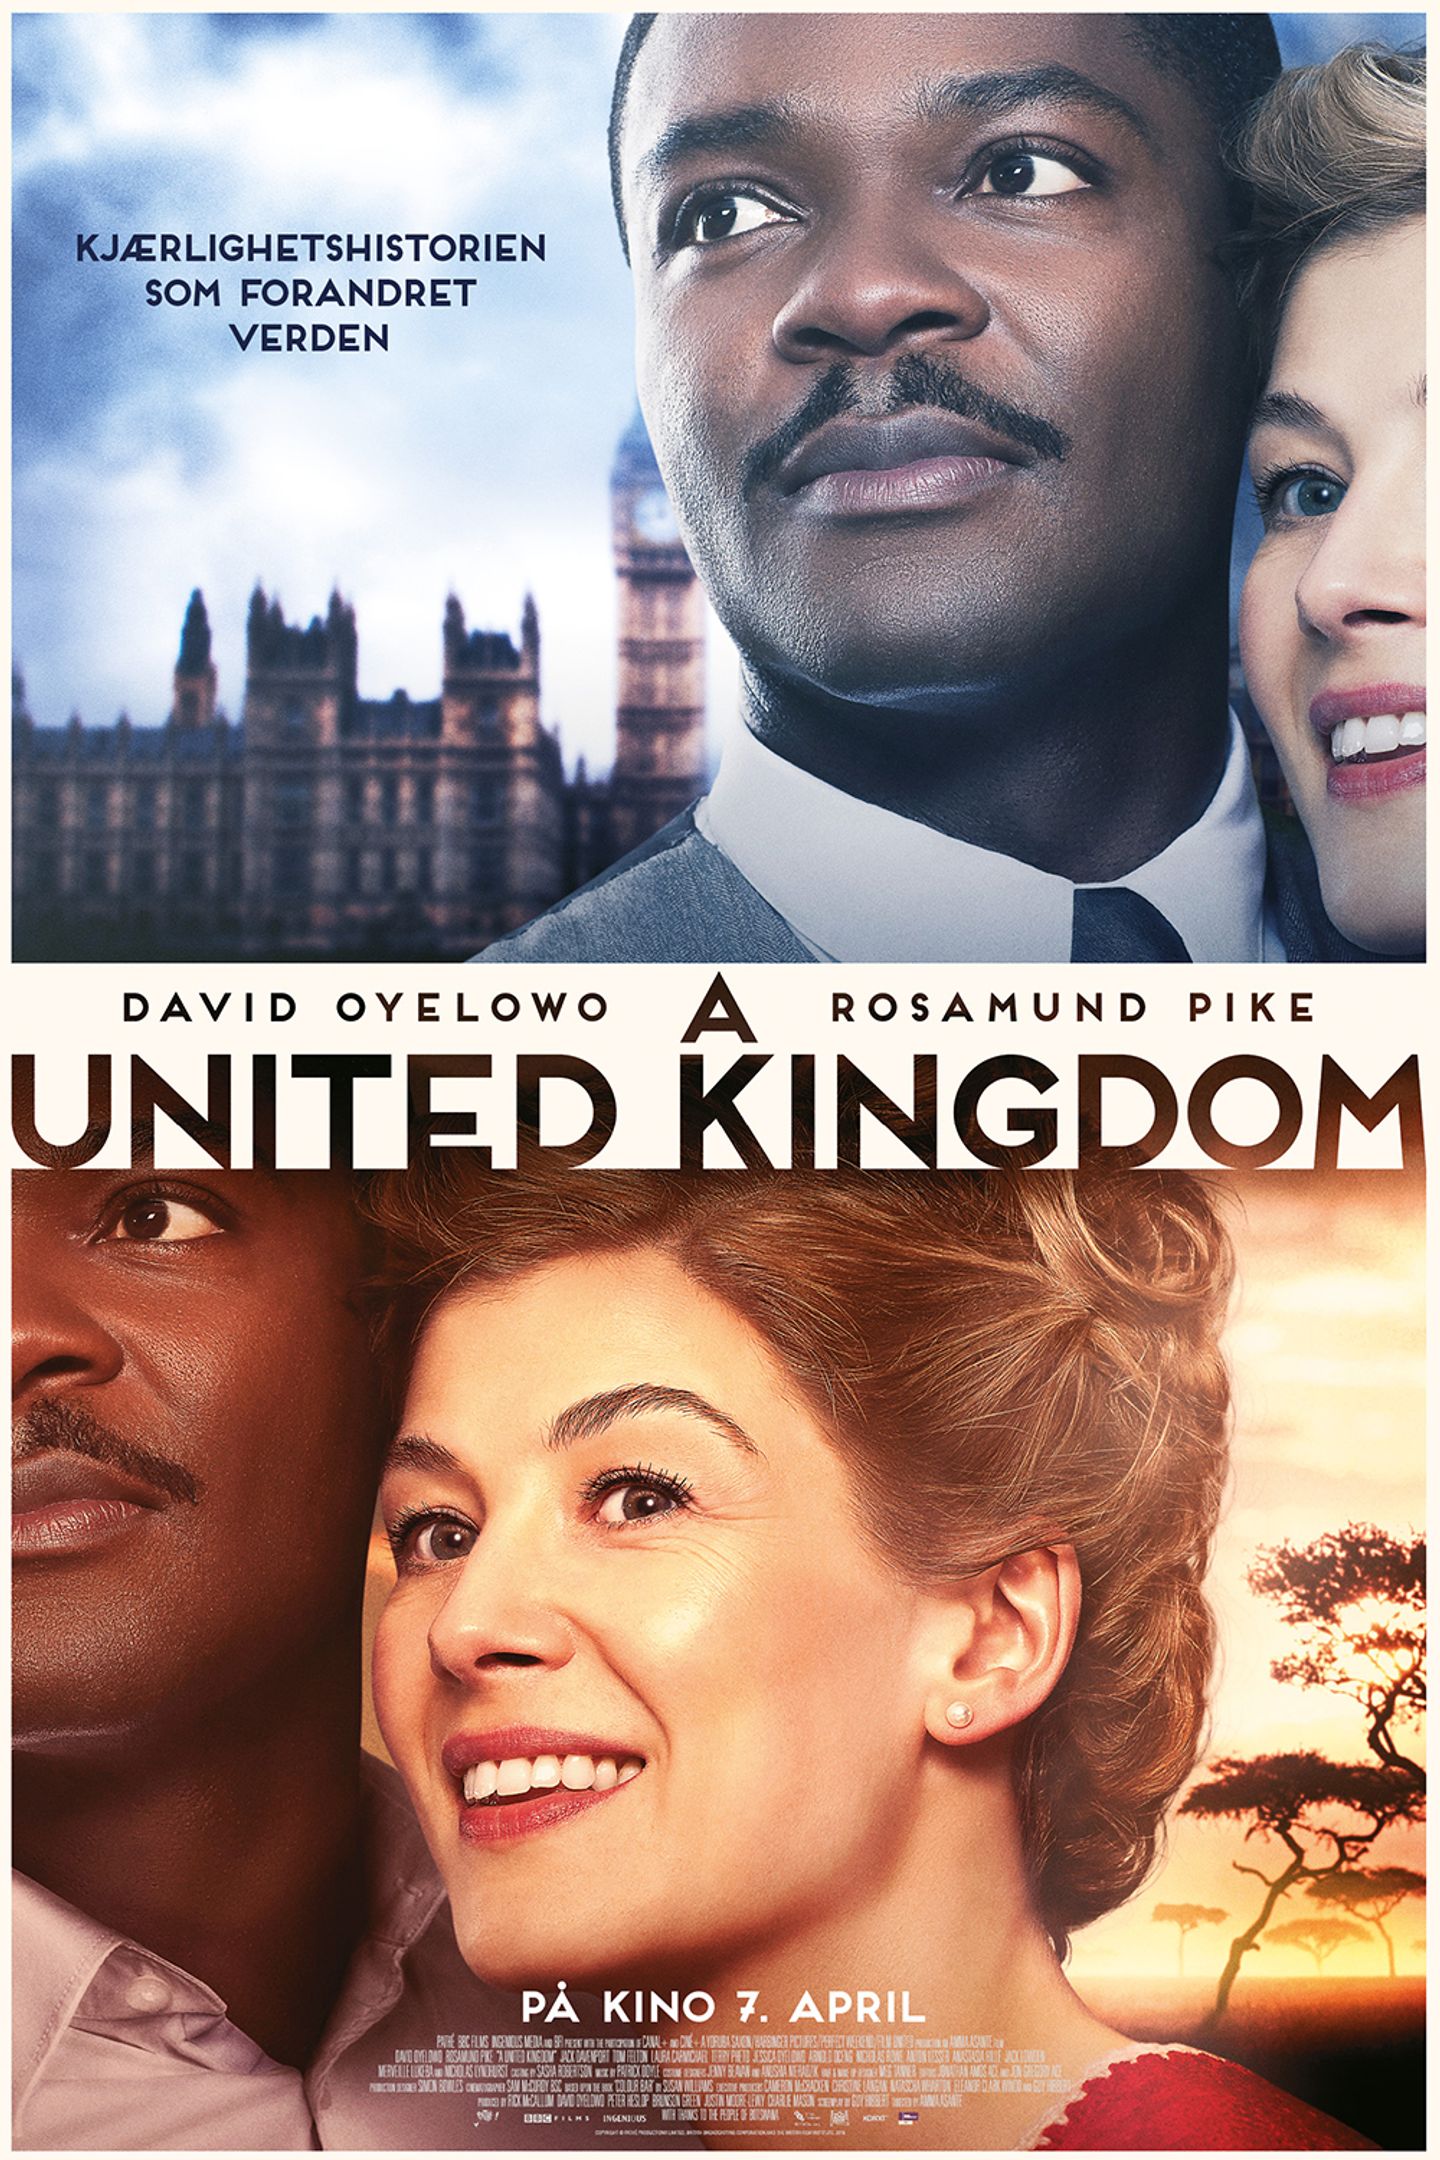 Plakat for 'A United Kingdom'